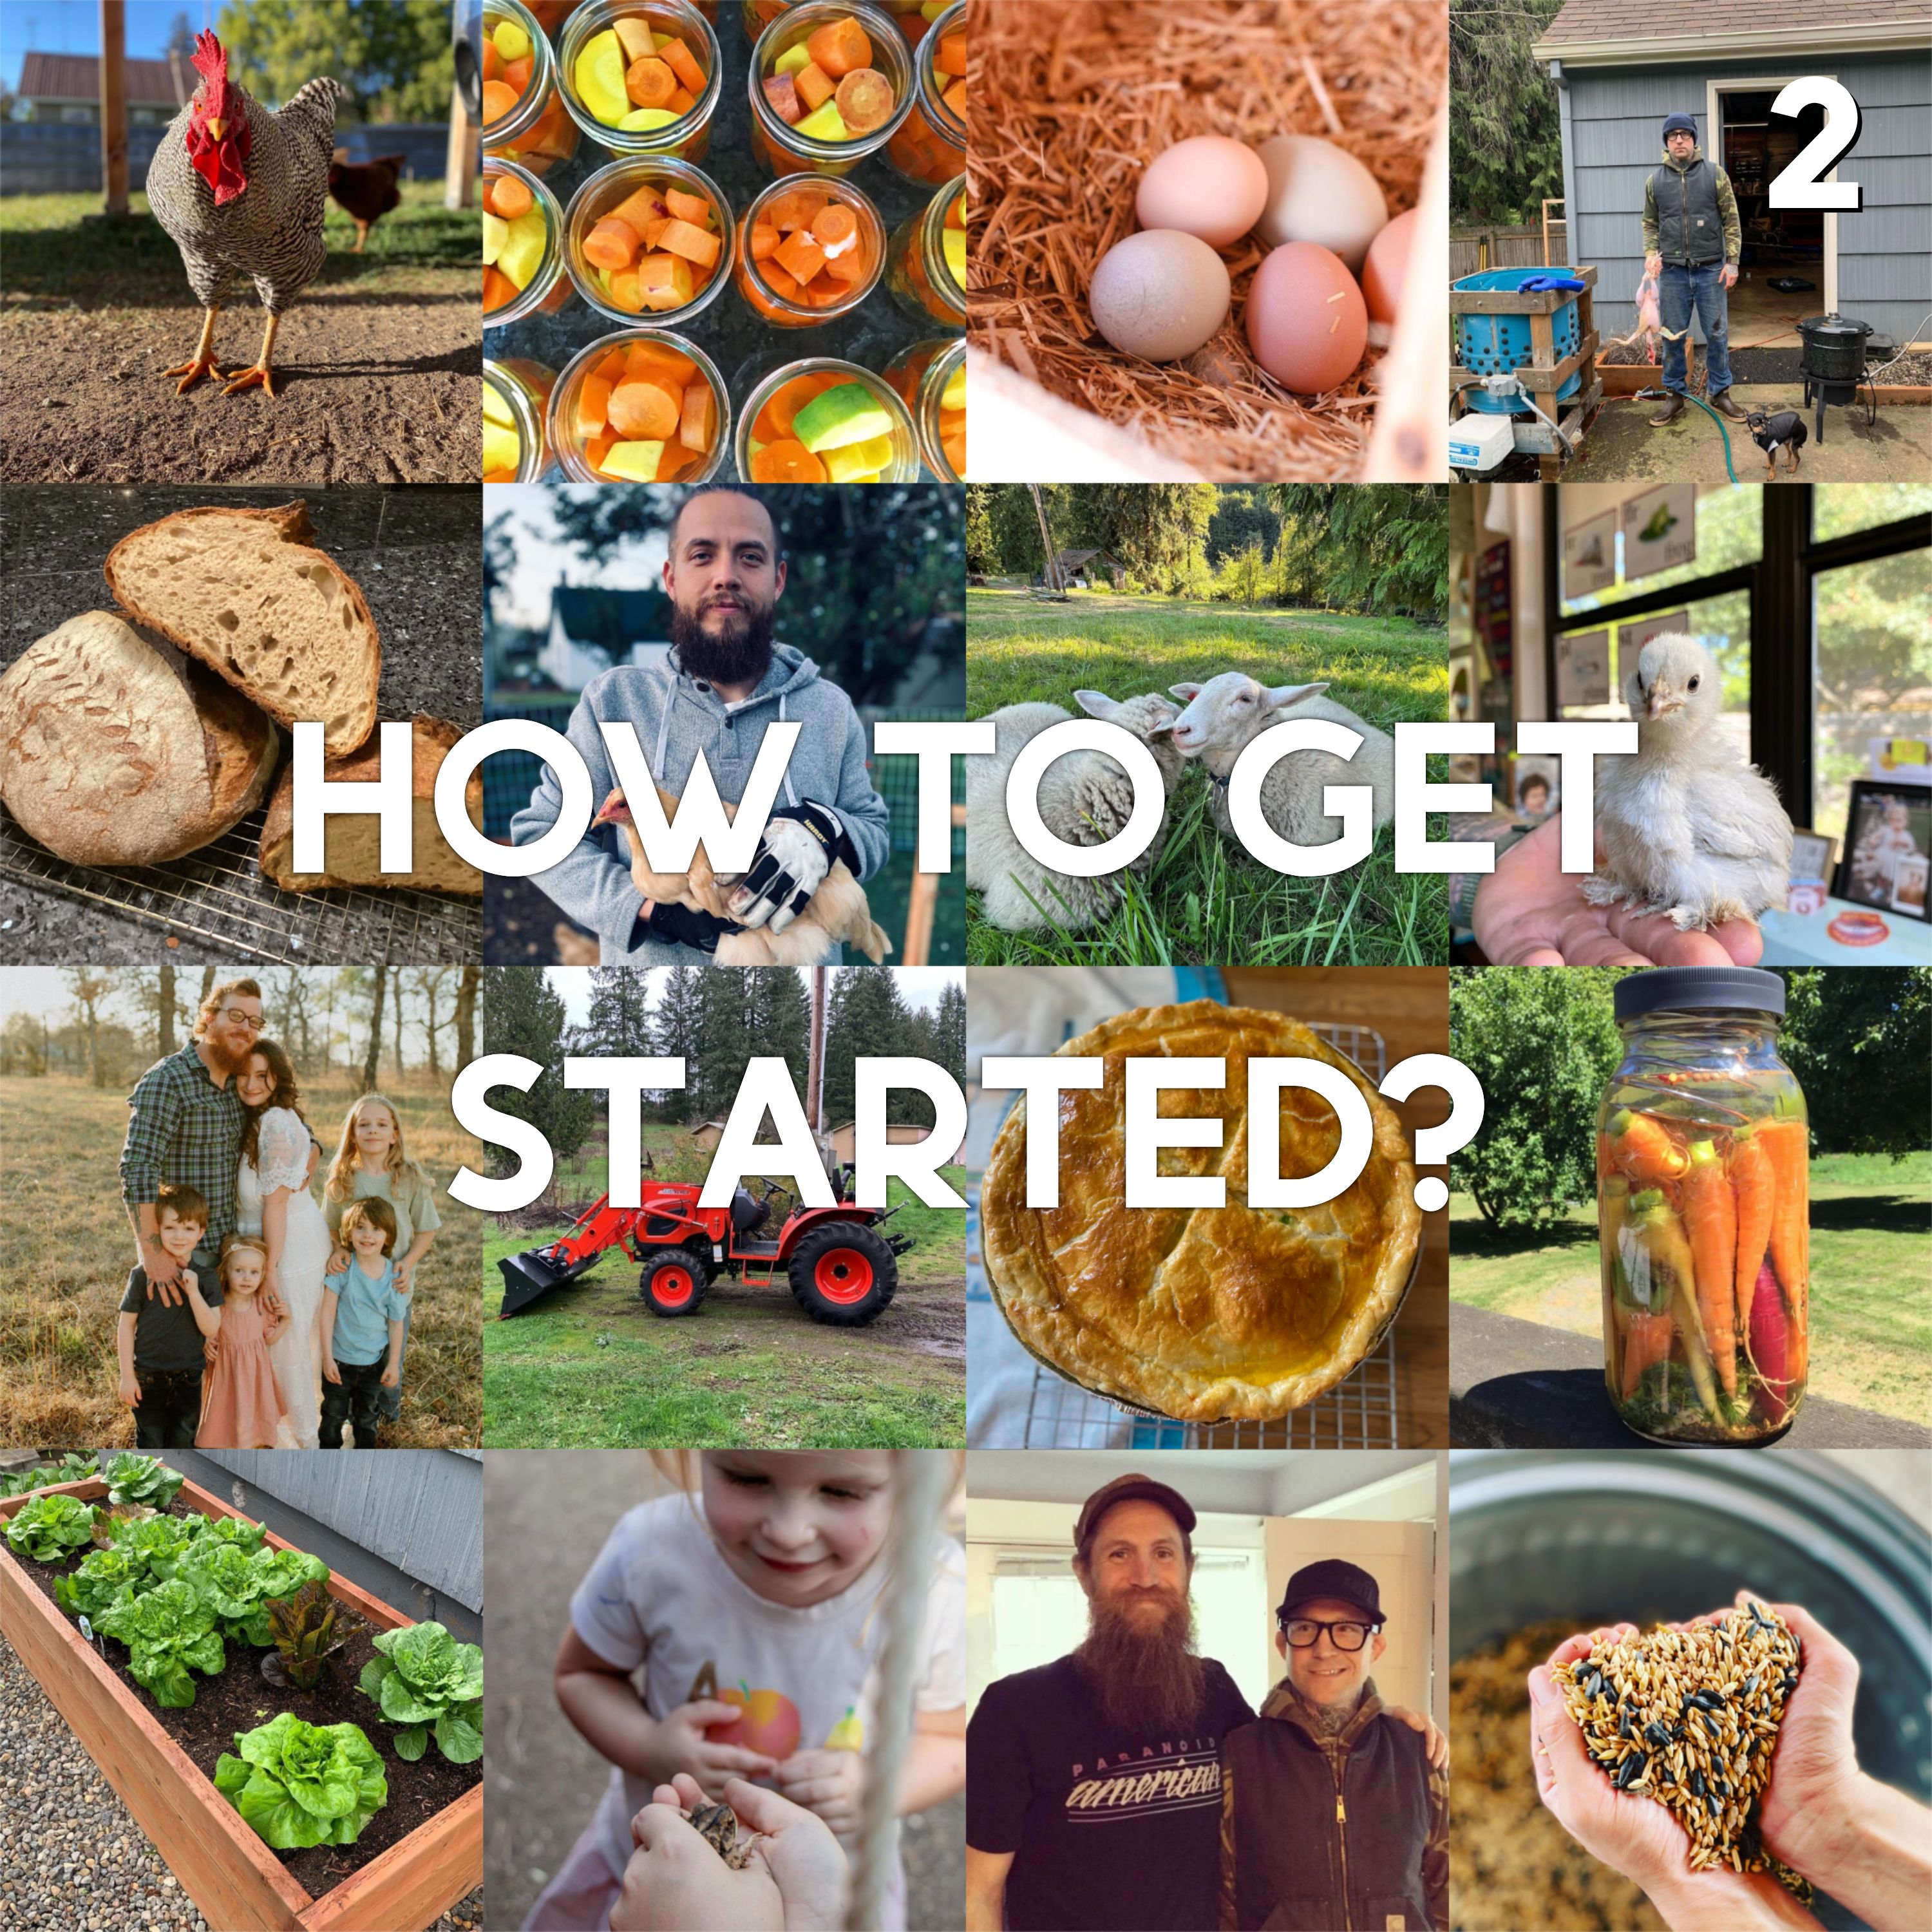 2 - How to get started?